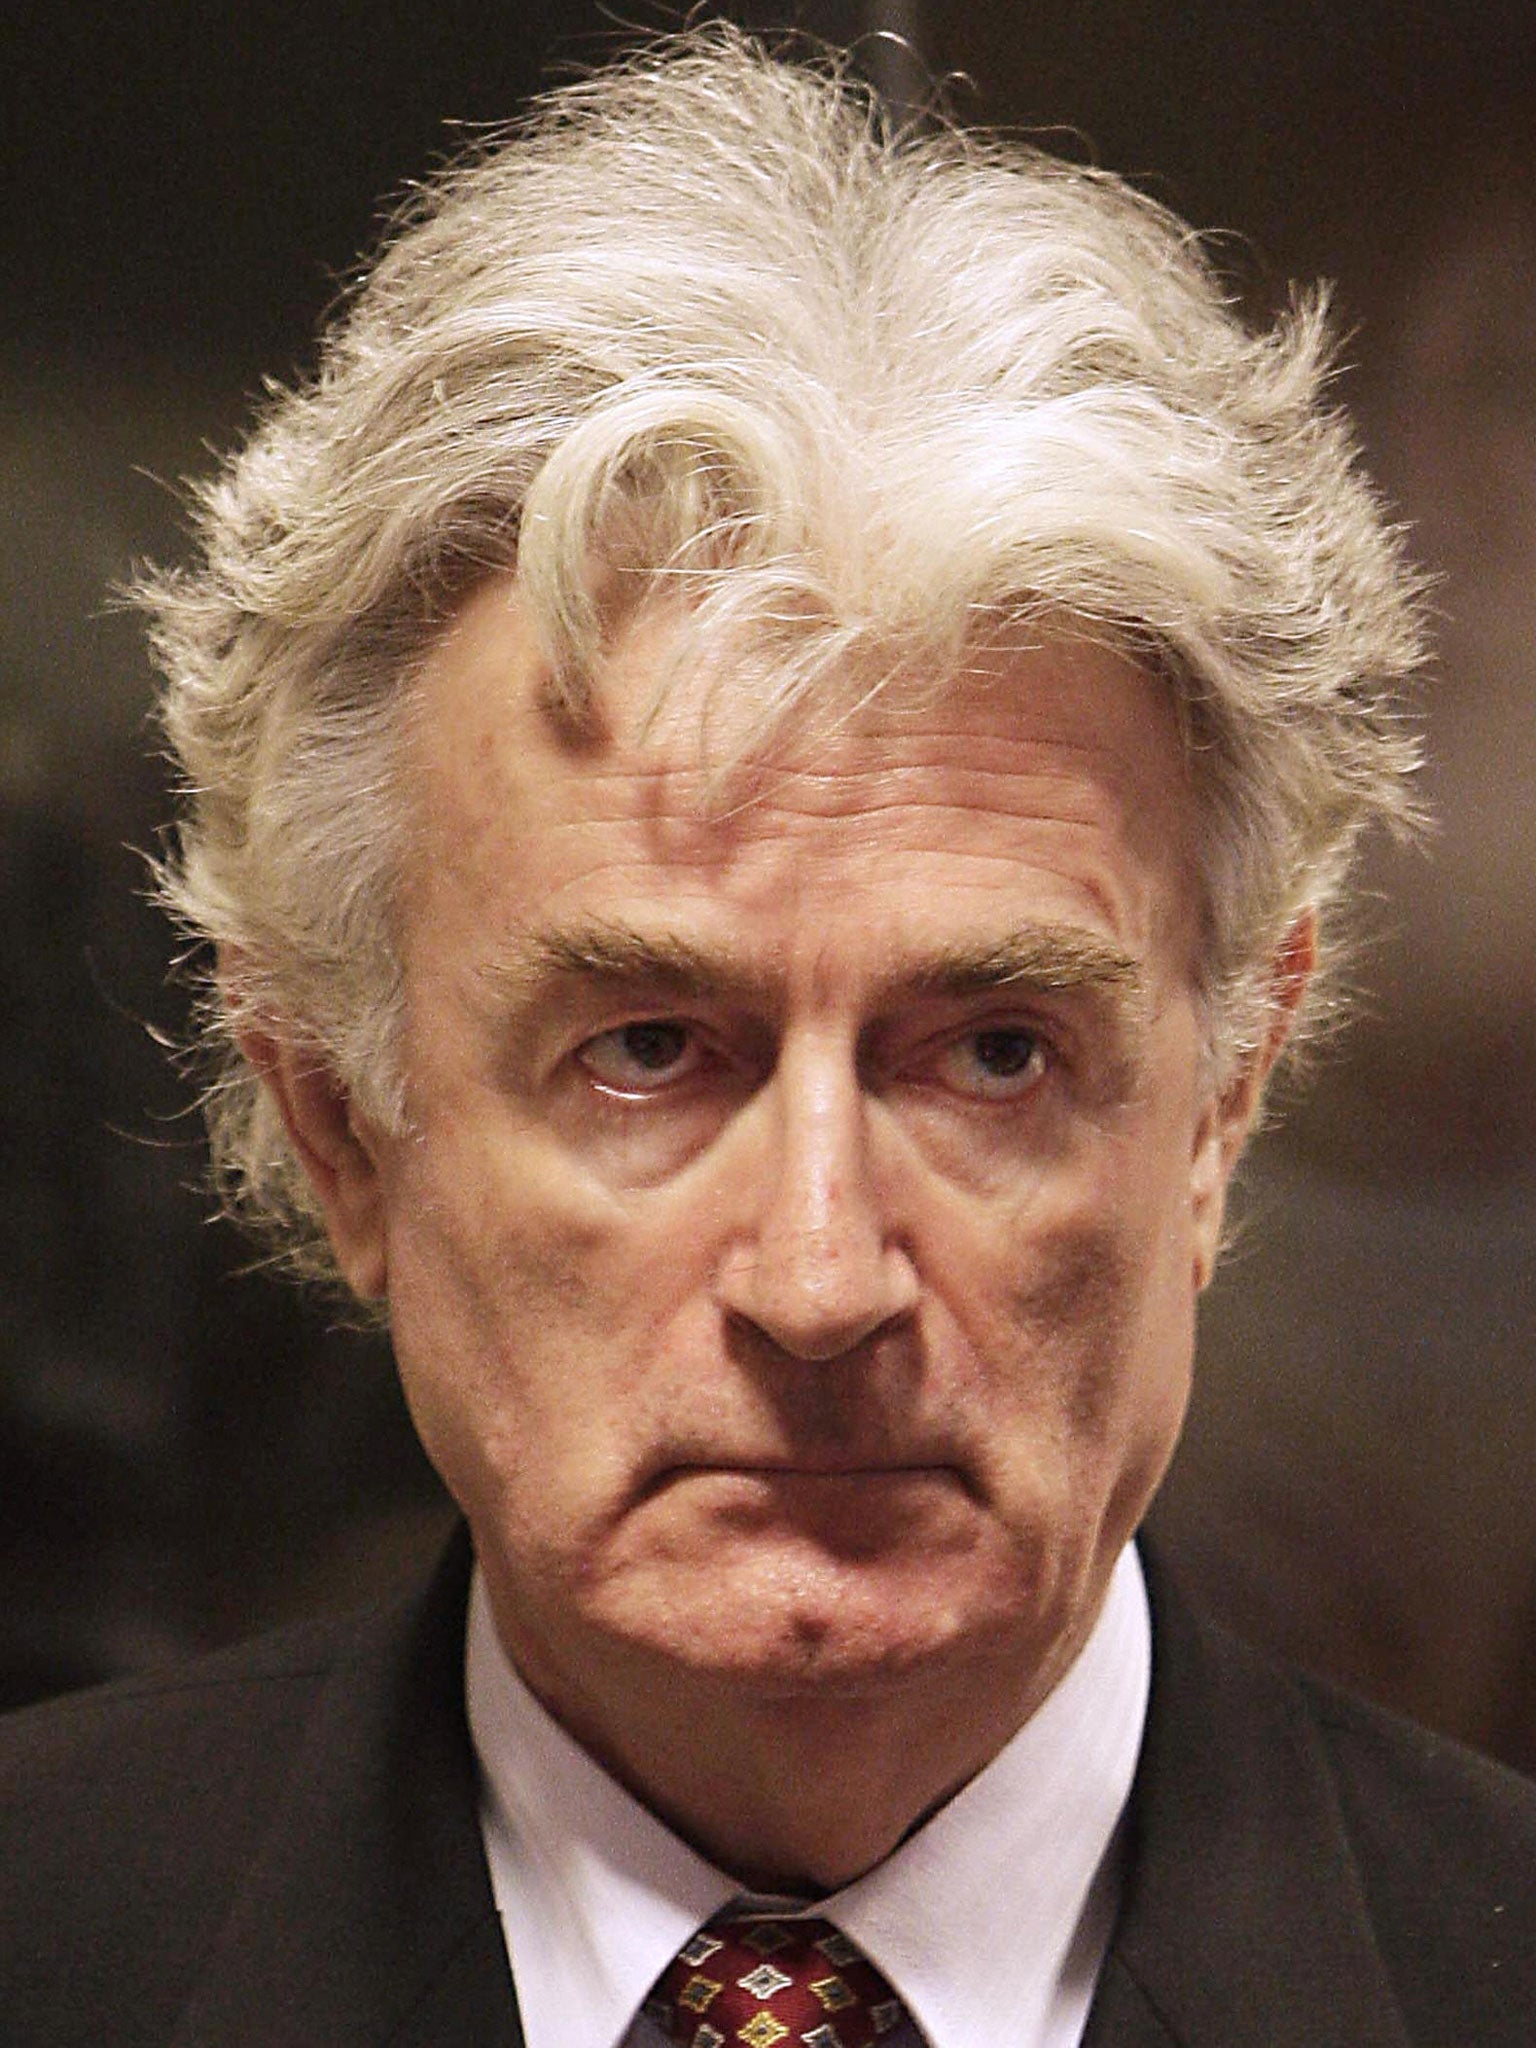 Radovan Karadzic was indicted for war crimes and genocide and spent 12 years on the run